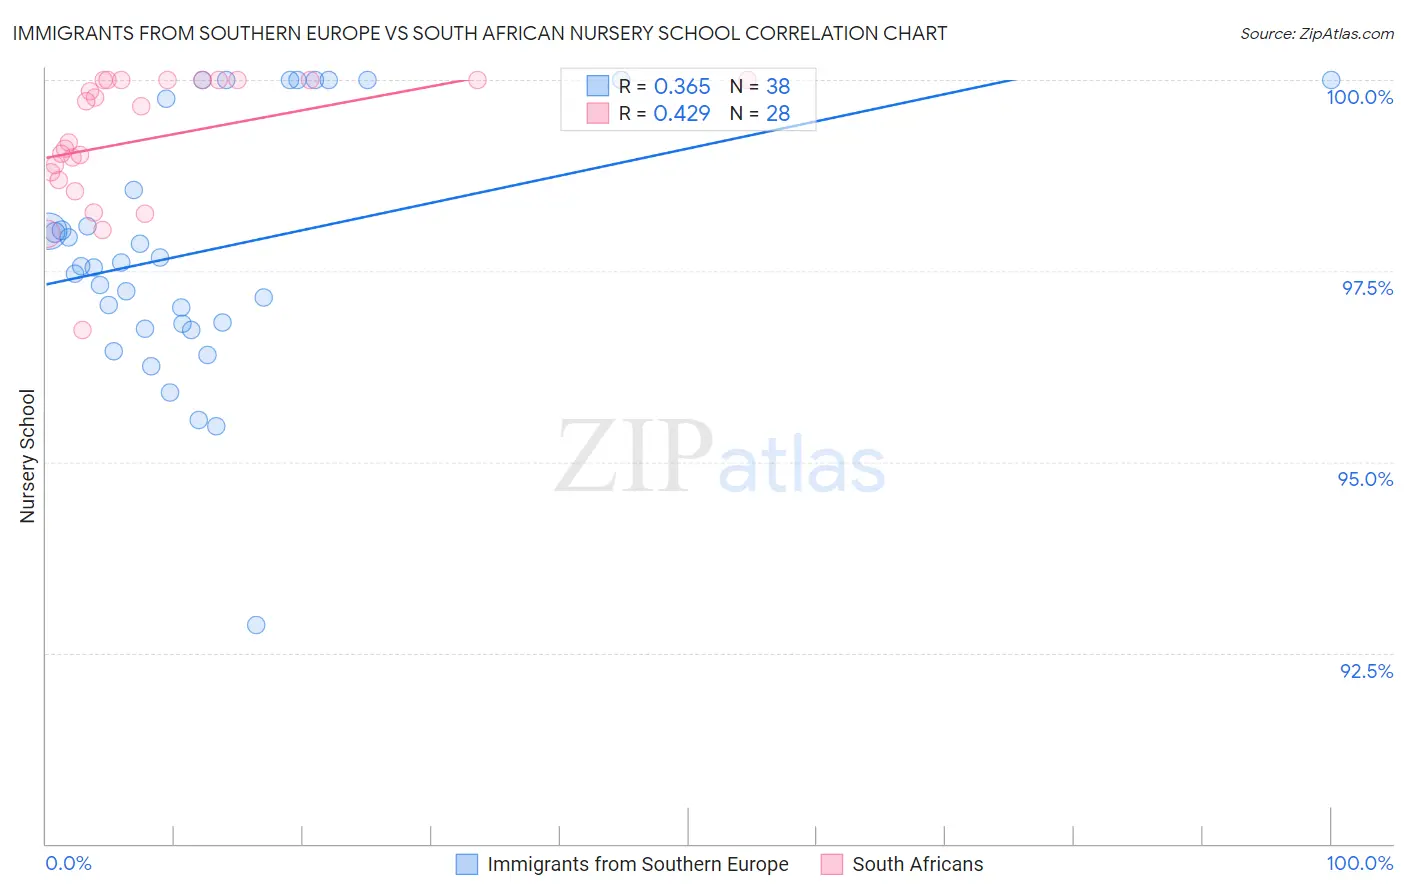 Immigrants from Southern Europe vs South African Nursery School